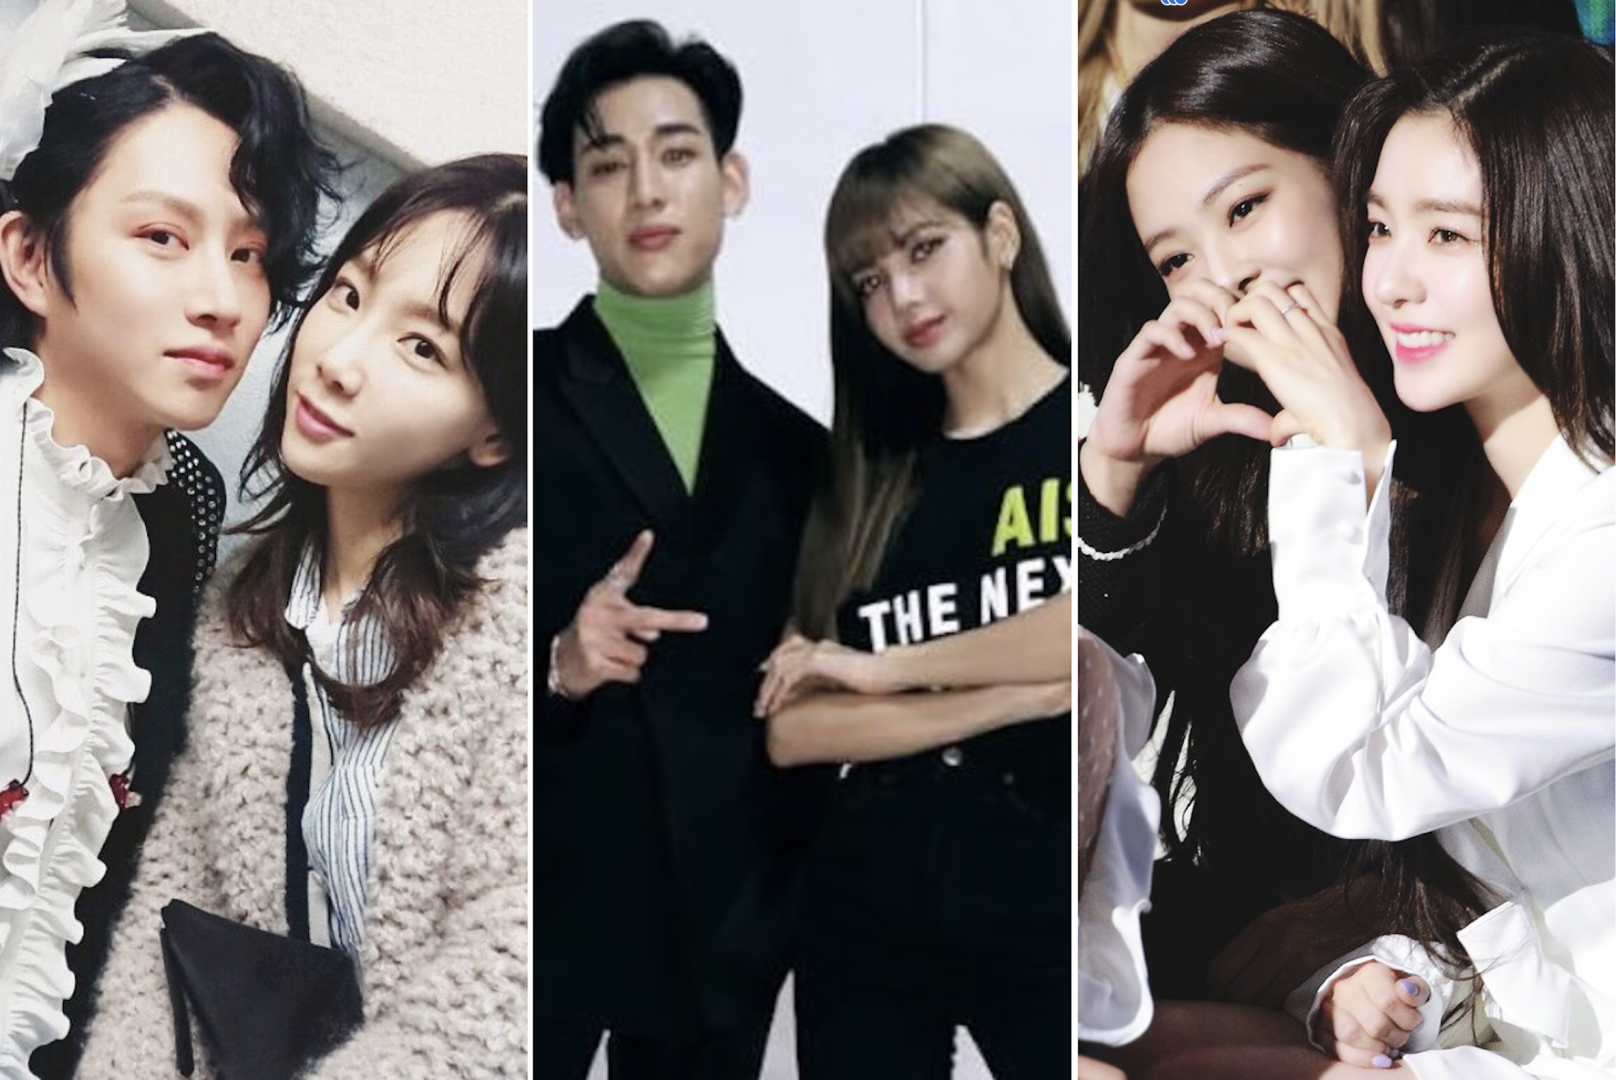 4 K Pop Bffs To Know Bts Jimin Exo S Kai And Shinee S Taemin Are All Part Of The Padding Squad While Blackpink S Jennie Is Friends With Red Velvet S Irene And Lisa Is Tight